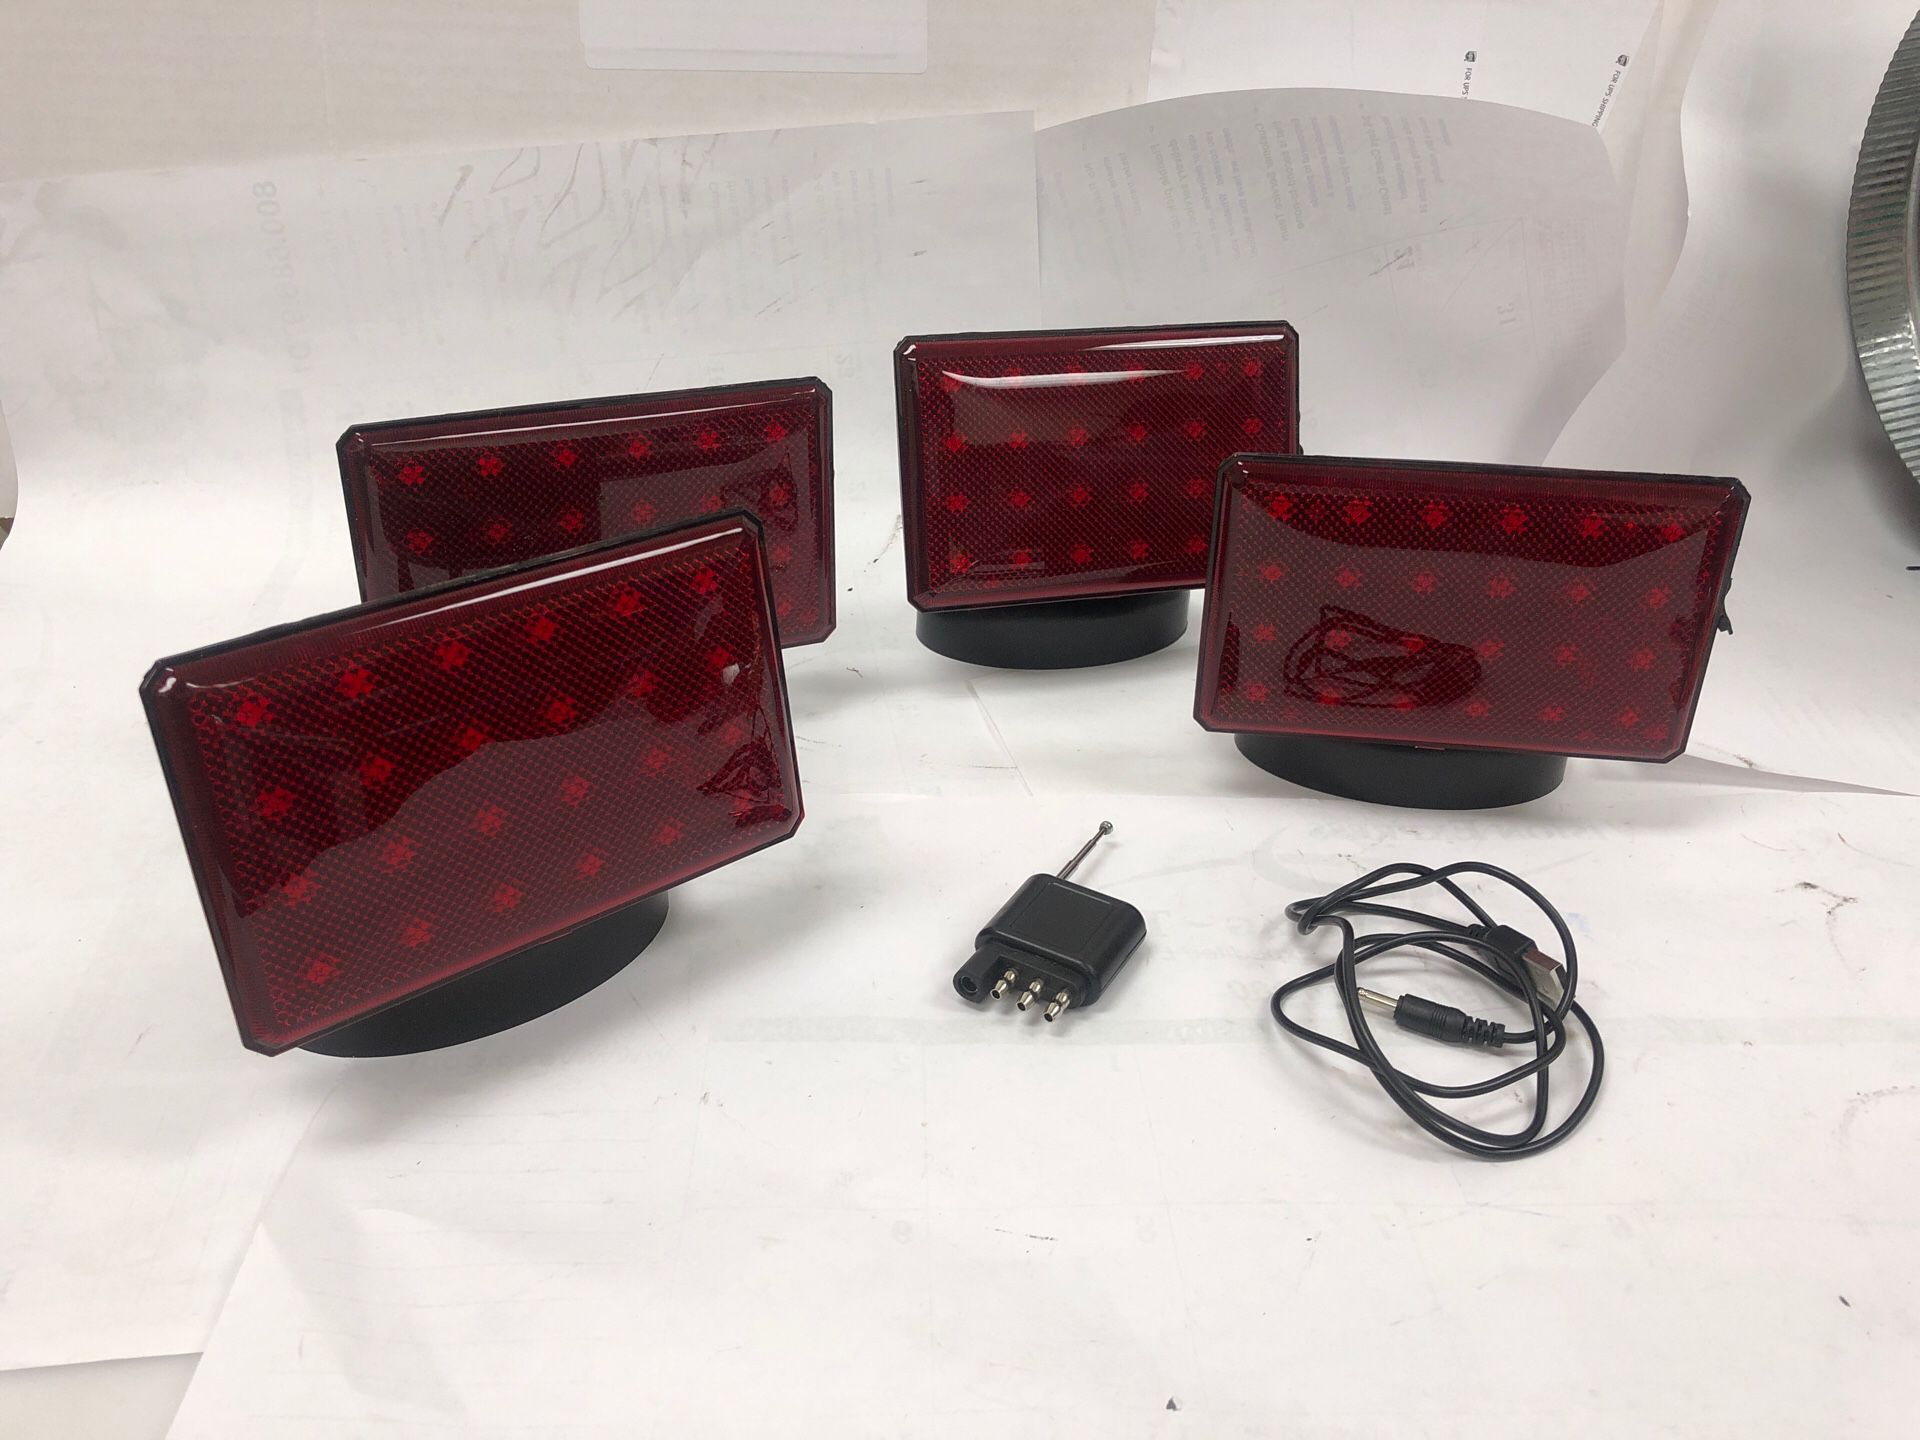 4 Wireless LED tow light kit haul towing trailer boat rechargeable